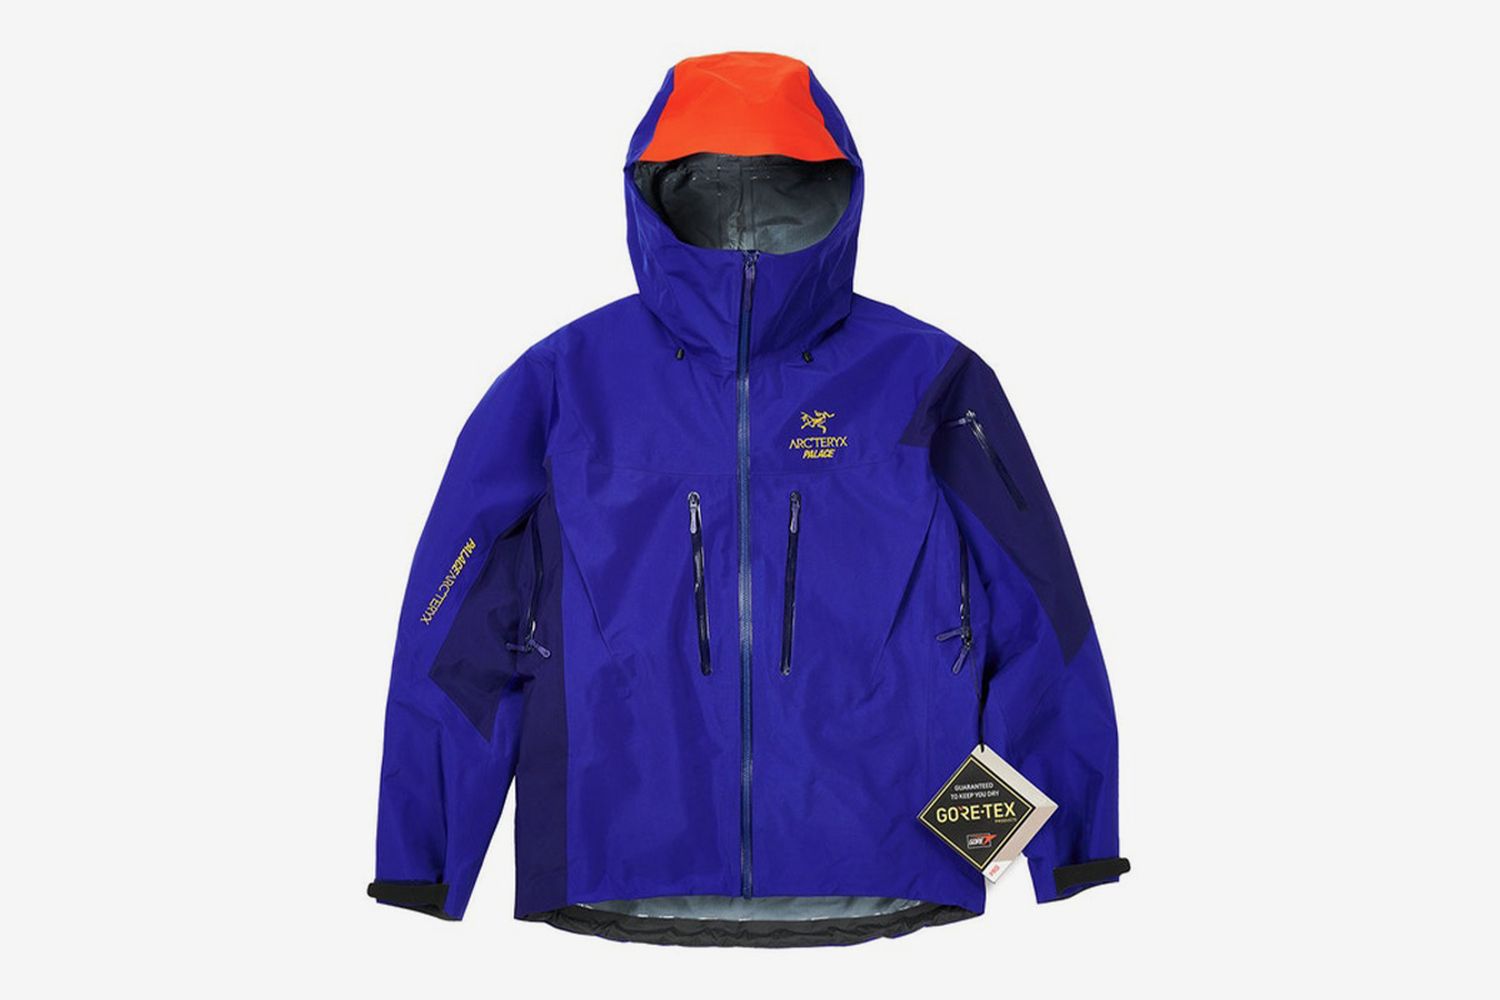 The Best Second-Hand Arc'teryx Items to Buy at Resale